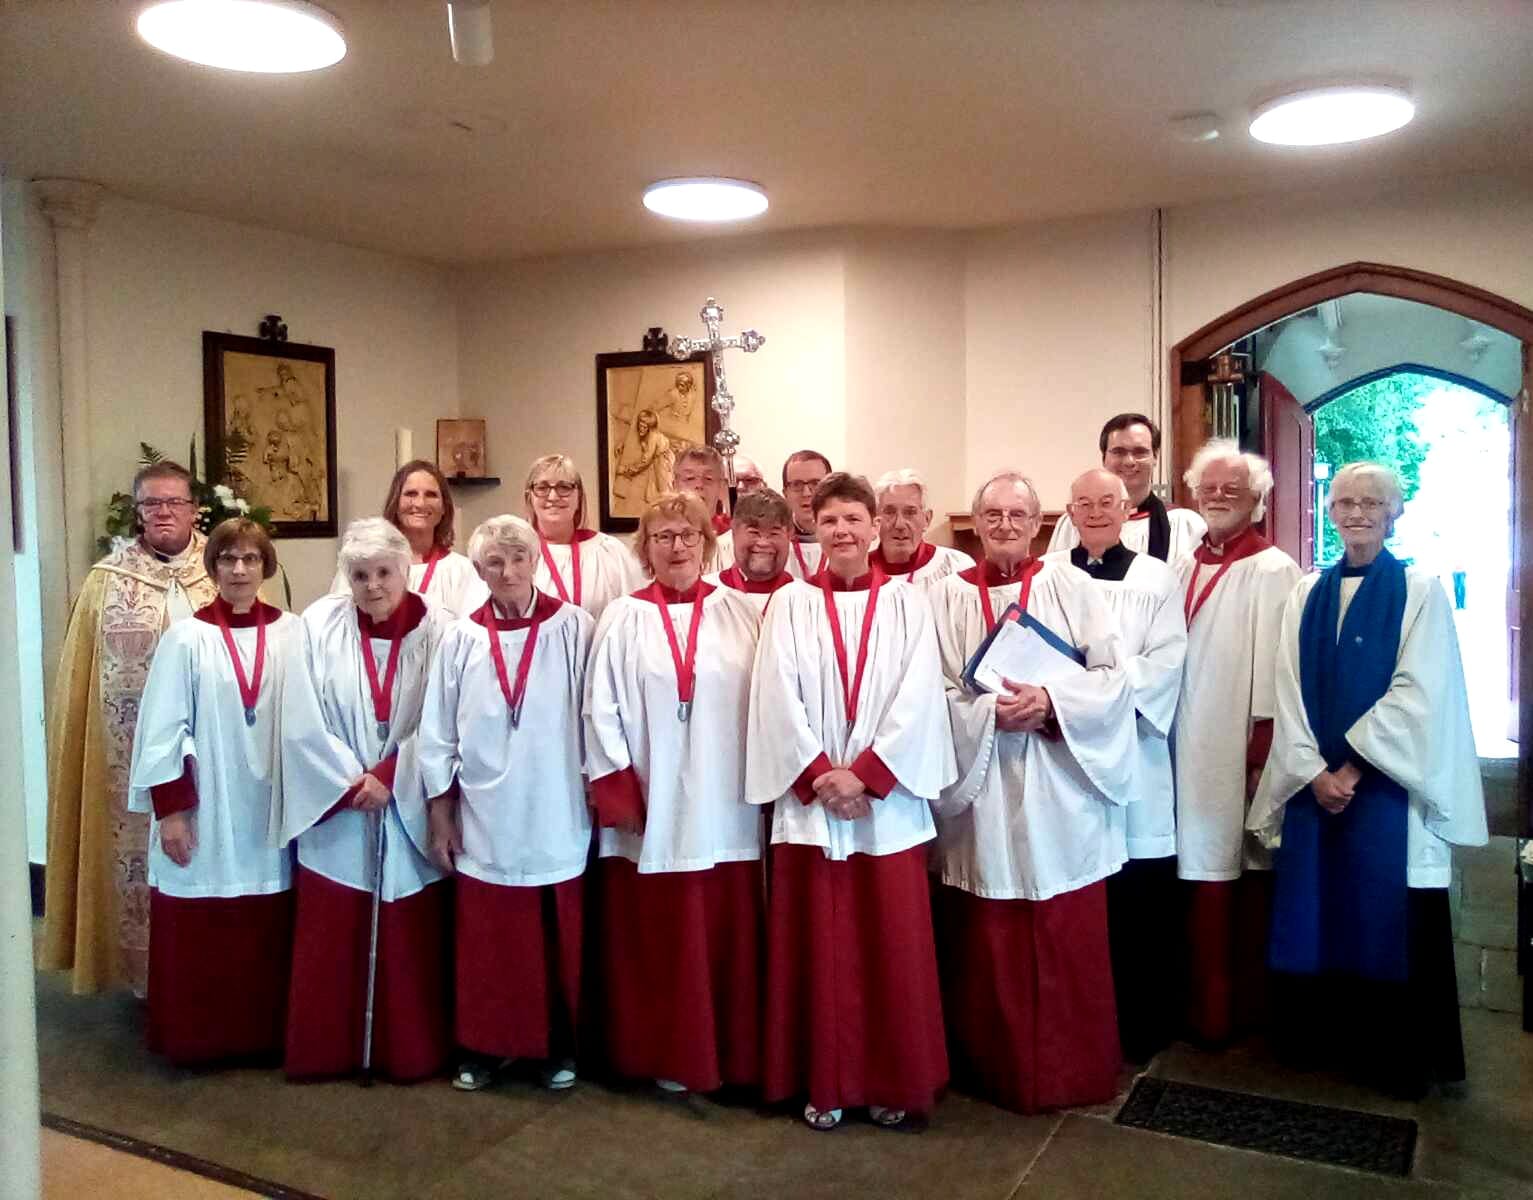 Christ Church Choir members in their red robes and white surplices